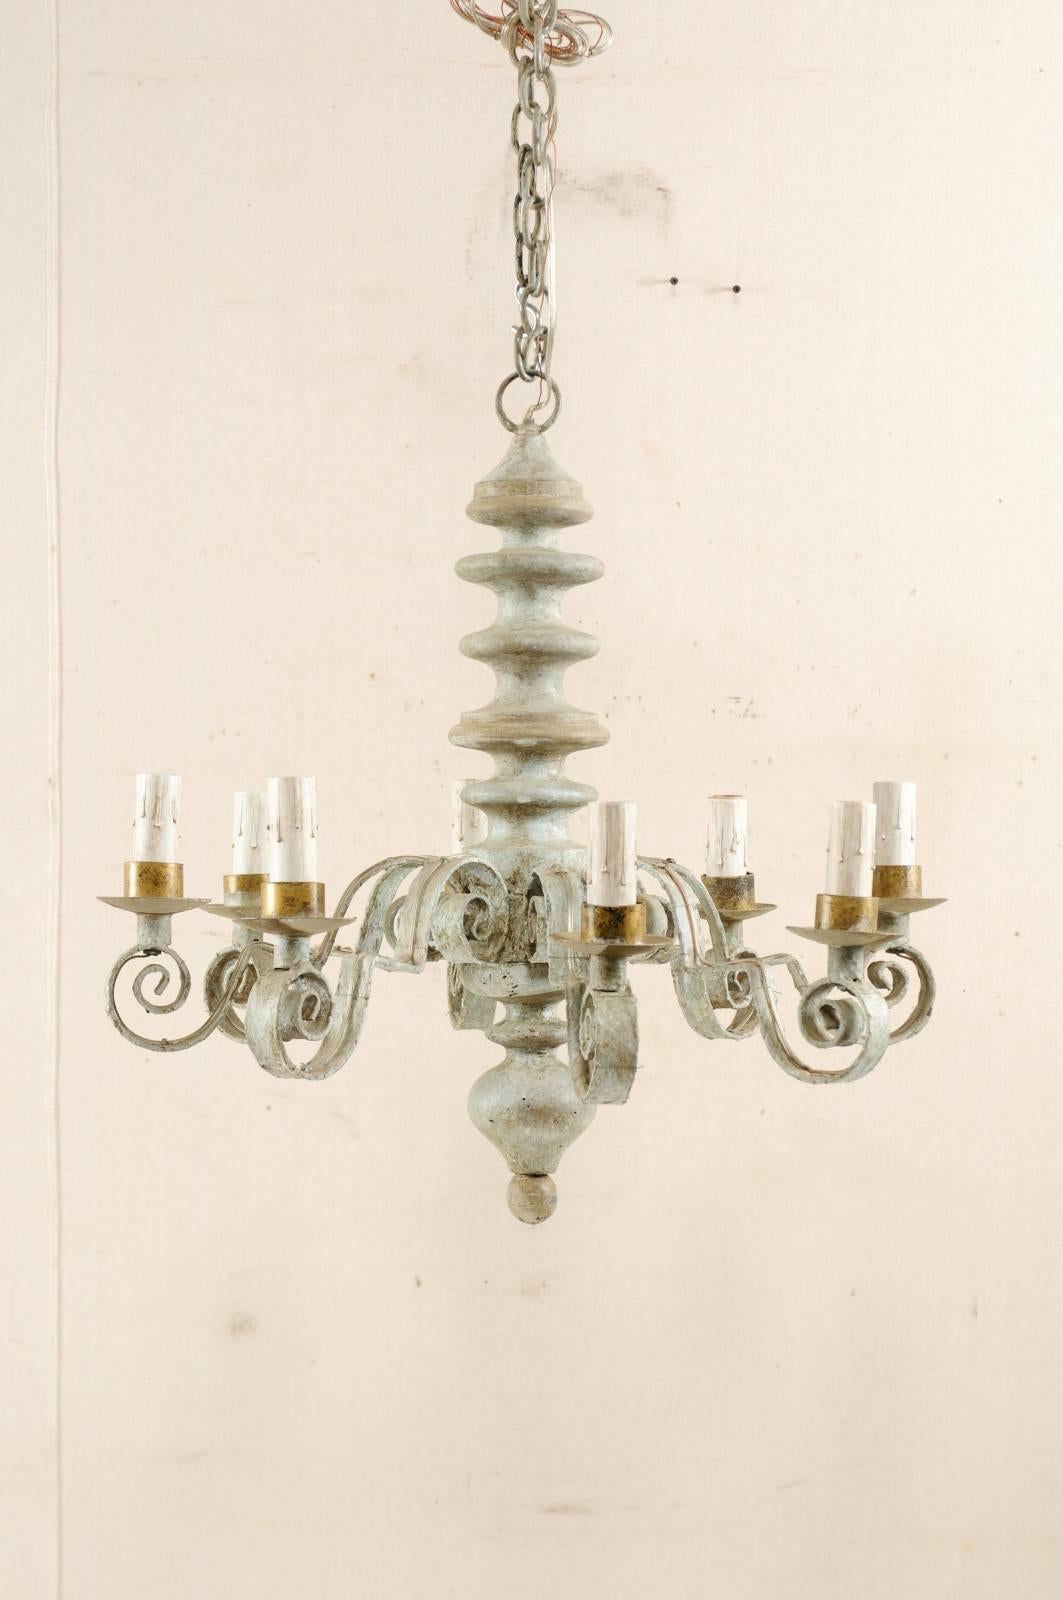 A lovely French vintage chandelier with turned central column. This French chandelier from the mid-20th century, features a beautifully turned central column with ball finial at it's bottom. There are eight scrolled iron arms emerging from the